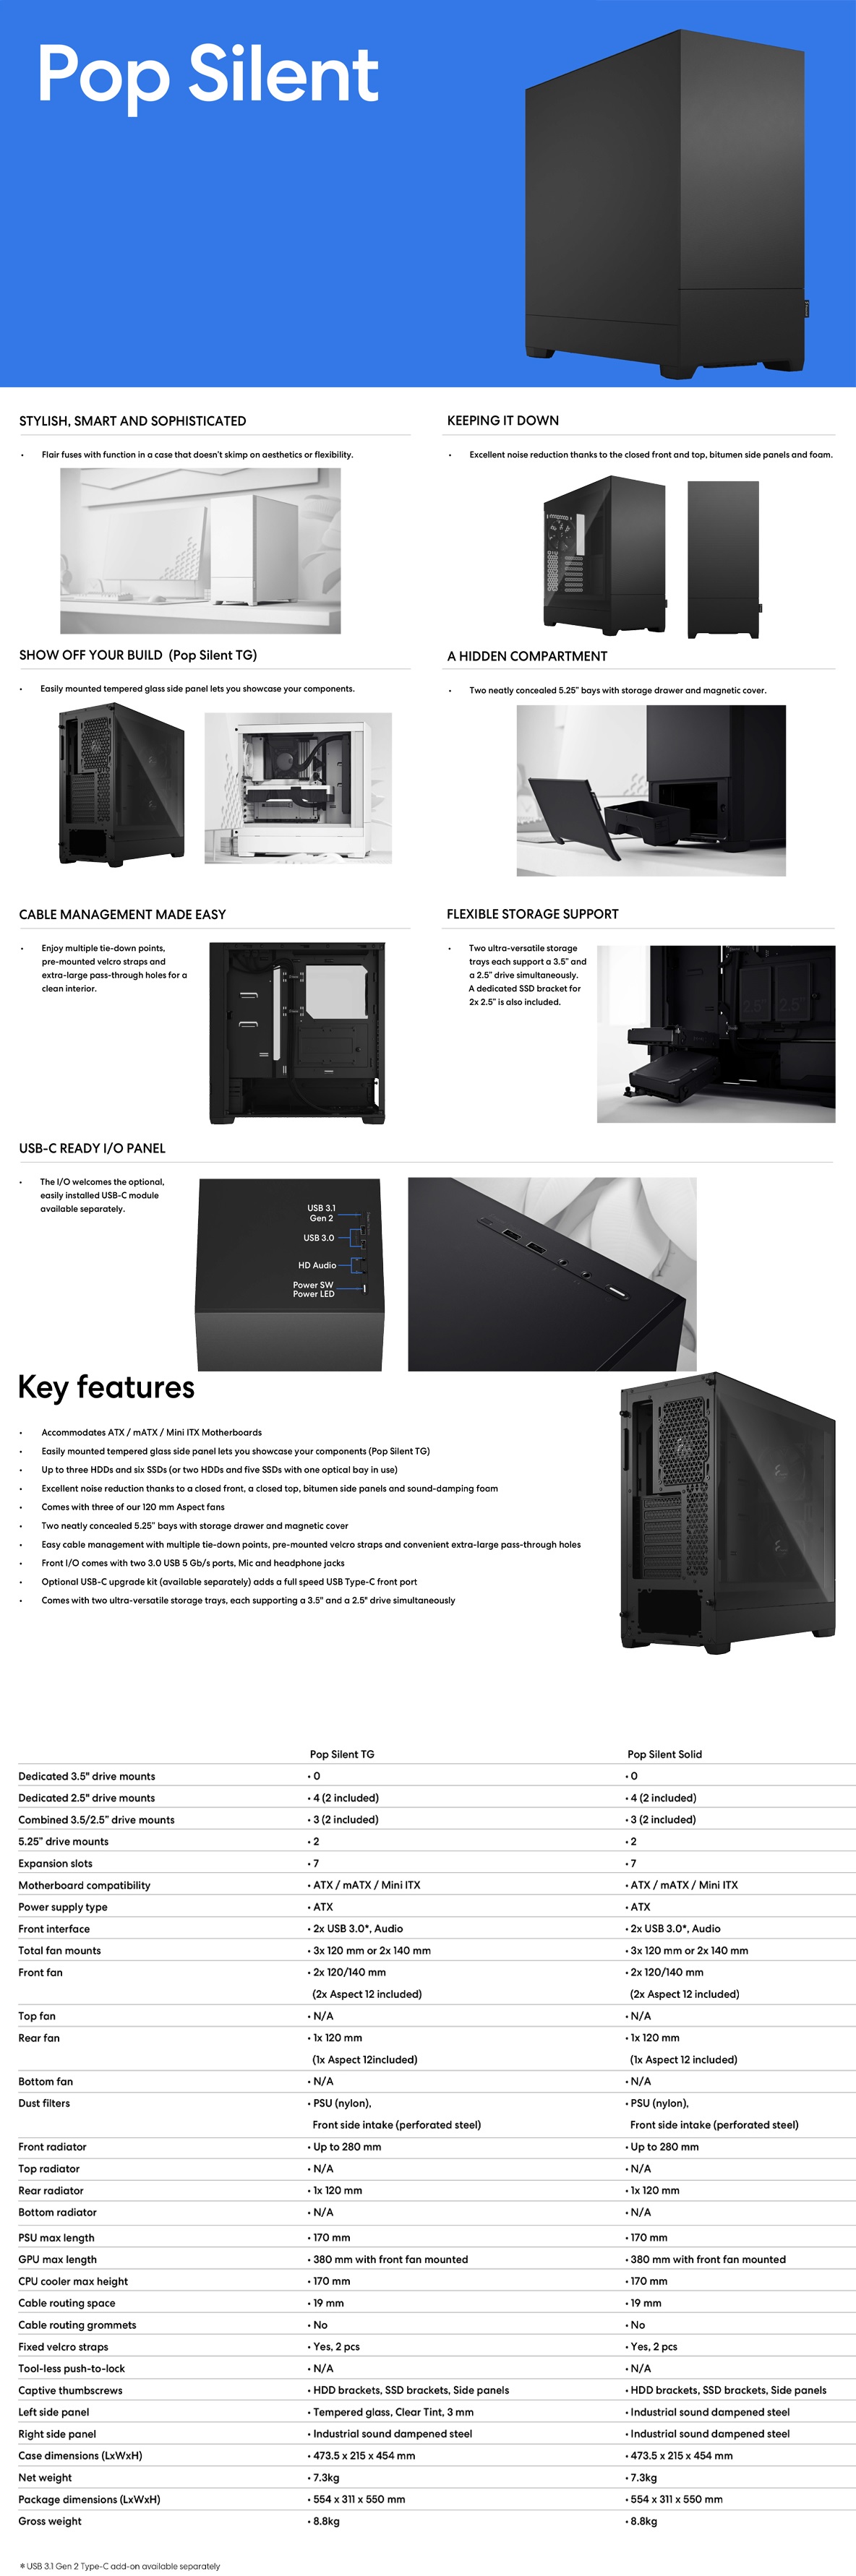 A large marketing image providing additional information about the product Fractal Design Pop Silent TG Clear Tint Mid Tower Case - White - Additional alt info not provided